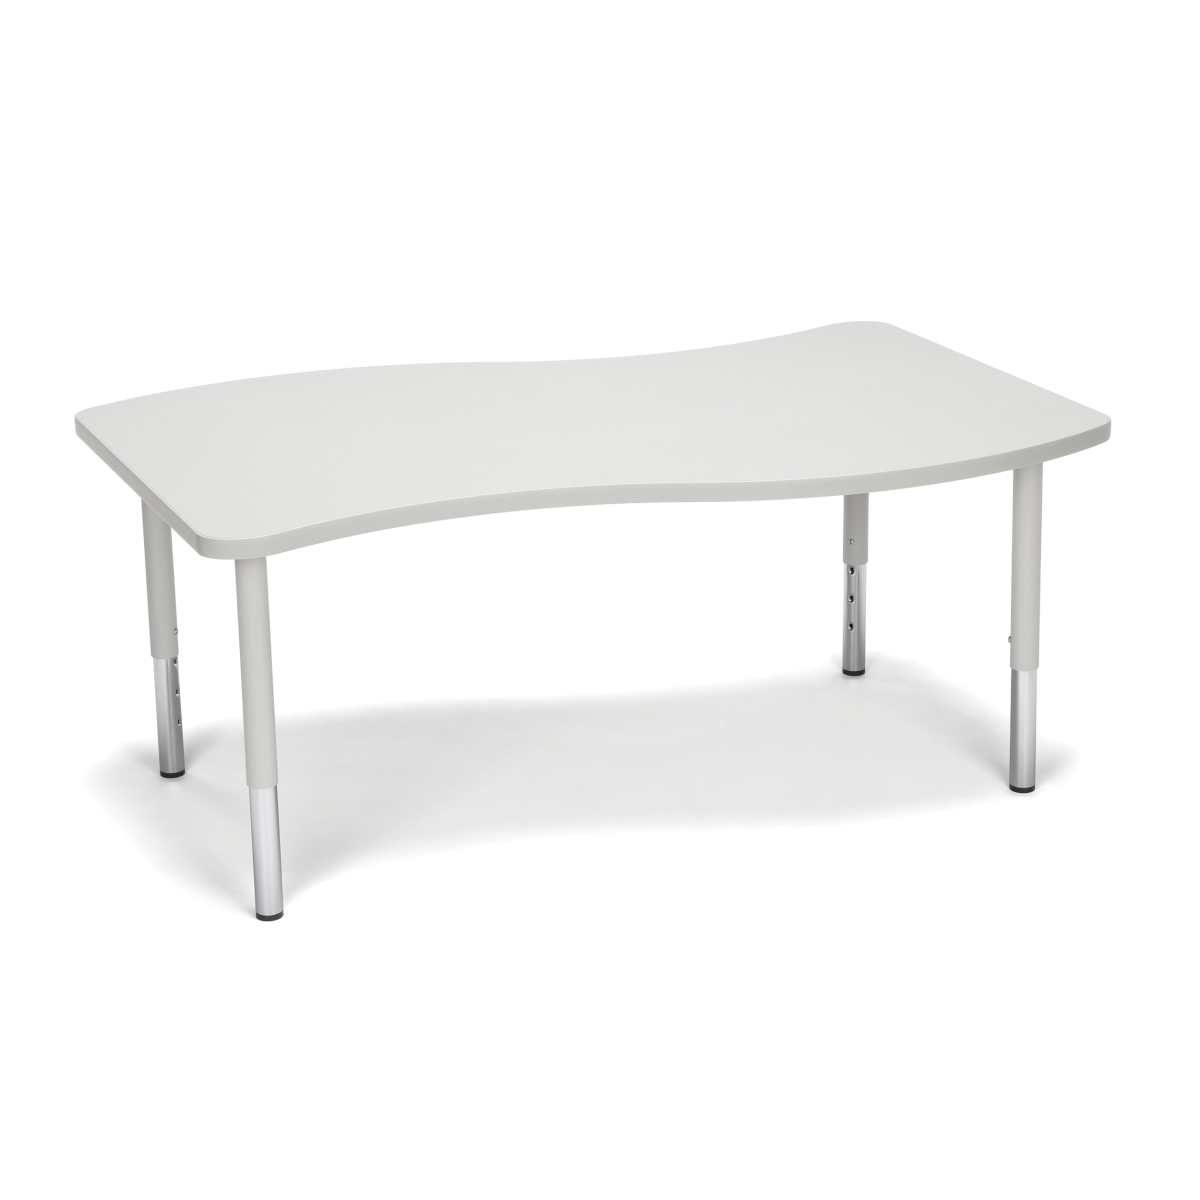 Wave-l-sl-grynb Adapt Series Large Wave Student Table - 18-26 In. Height Adjustable Desk, Gray Nebula